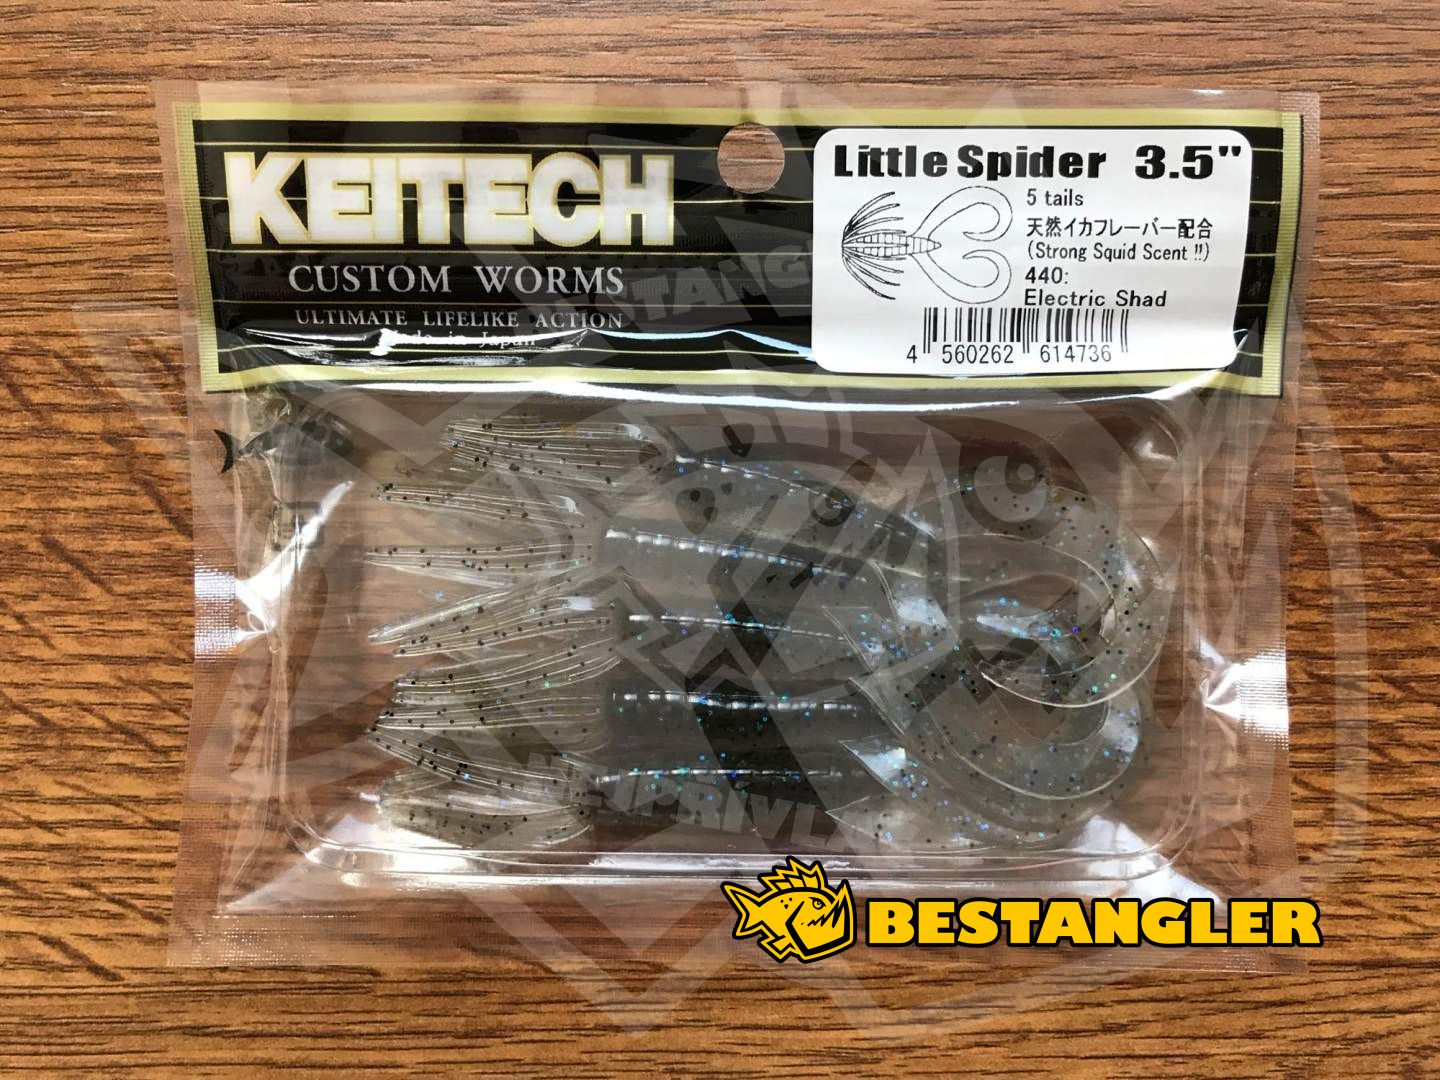 Keitech Little Spider 3.5 Electric Shad